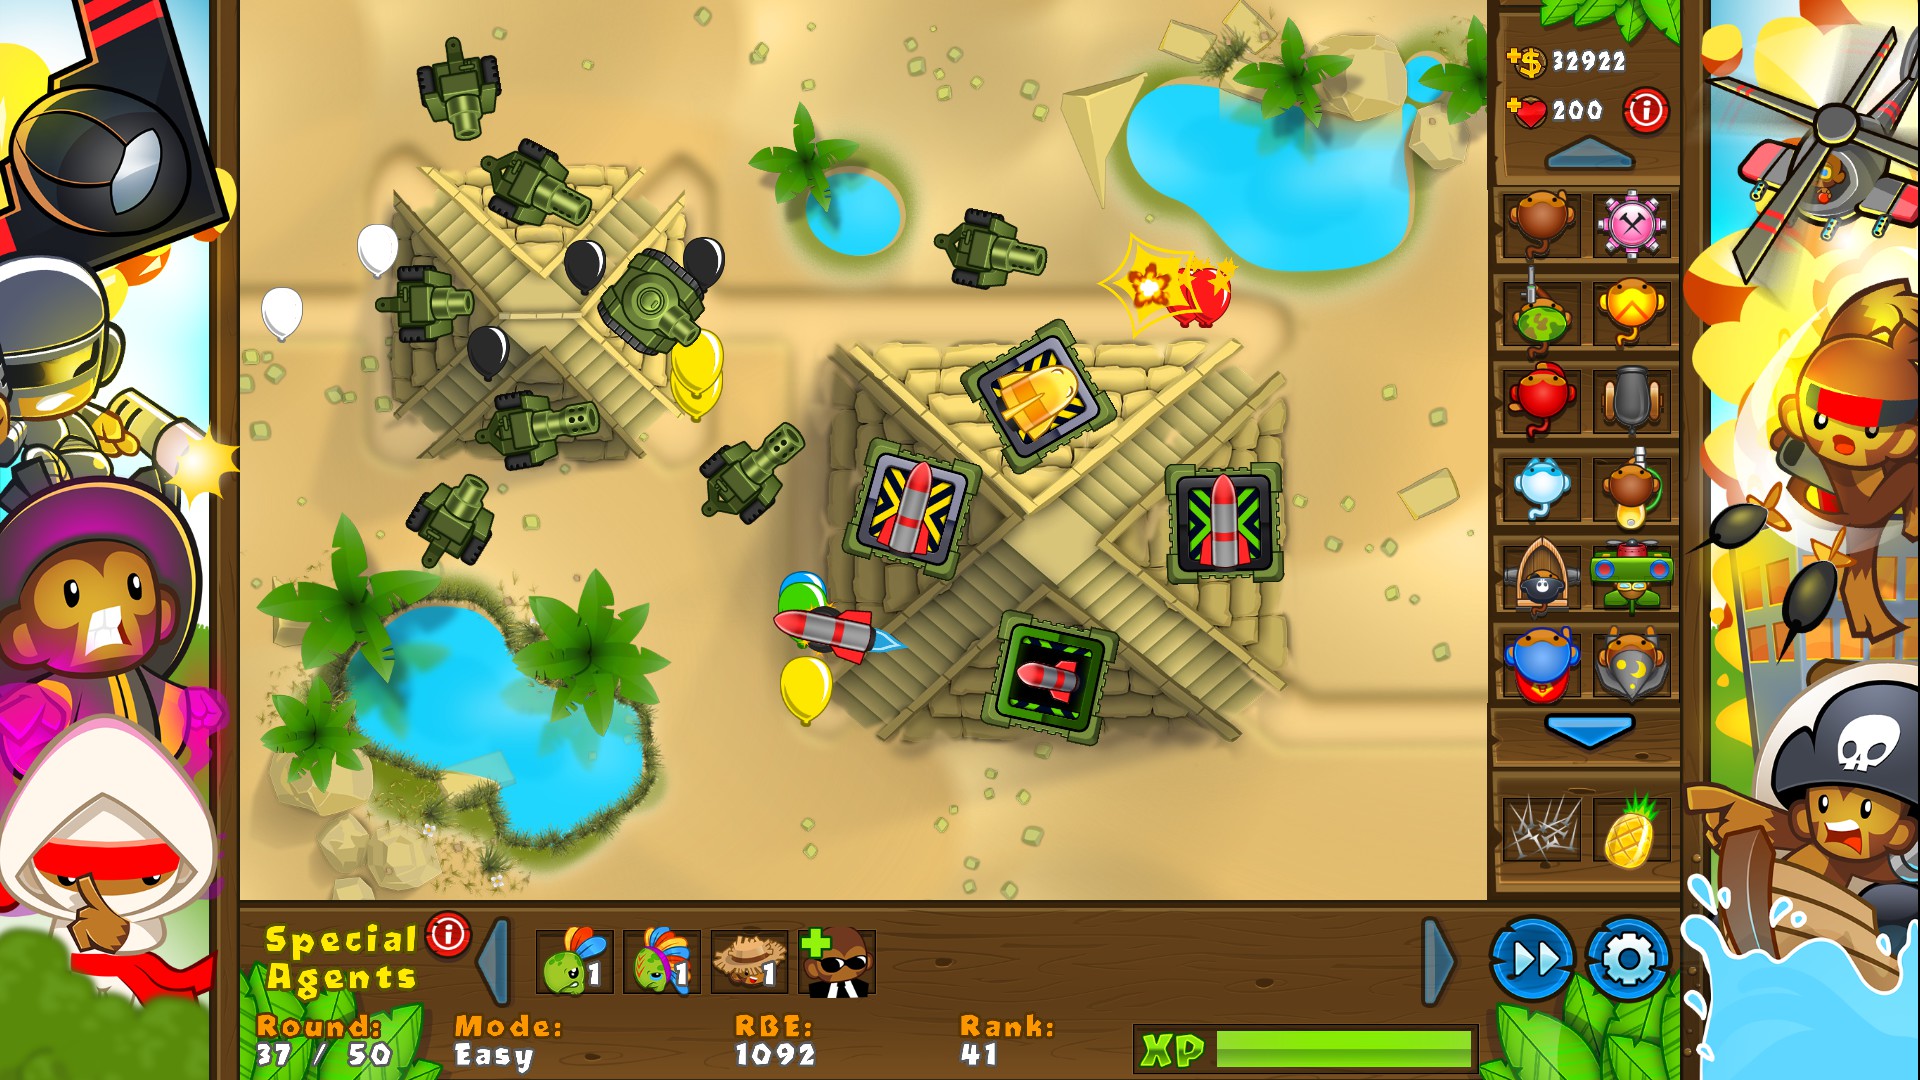 Bloons TD 5 - Military Bomb Tower Skin Featured Screenshot #1